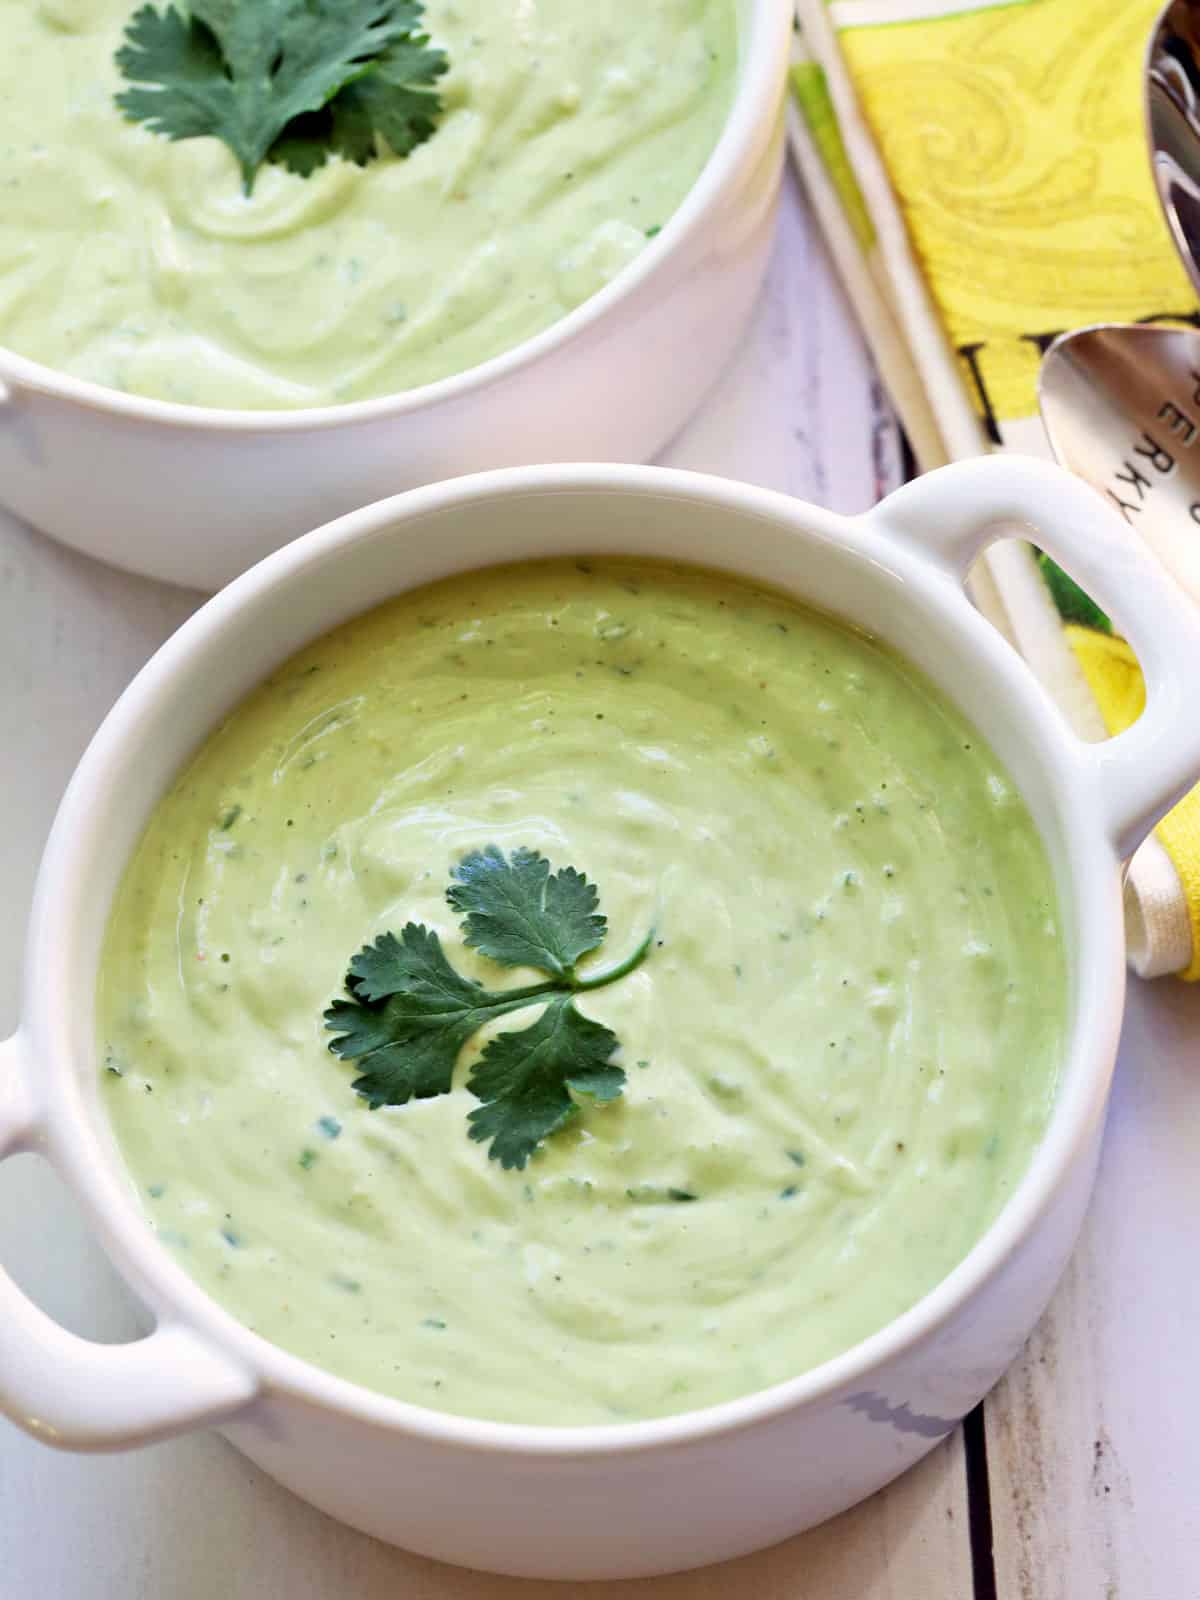 Avocado soup is served in white bowls.